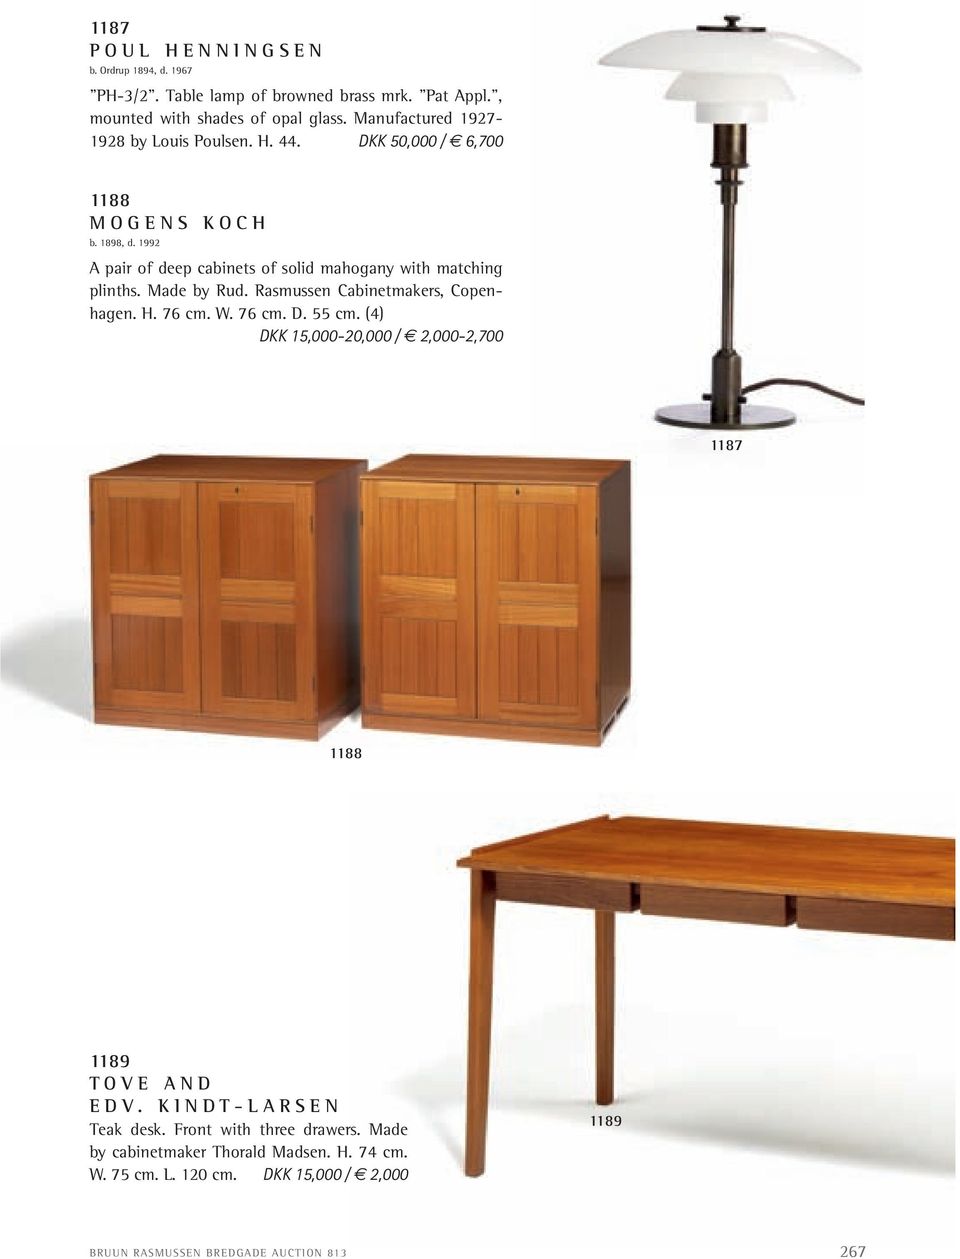 1992 A pair of deep cabinets of solid mahogany with matching plinths. Made by Rud. Rasmussen cabinetmakers, copenhagen. H. 76 cm. W. 76 cm. D. 55 cm.